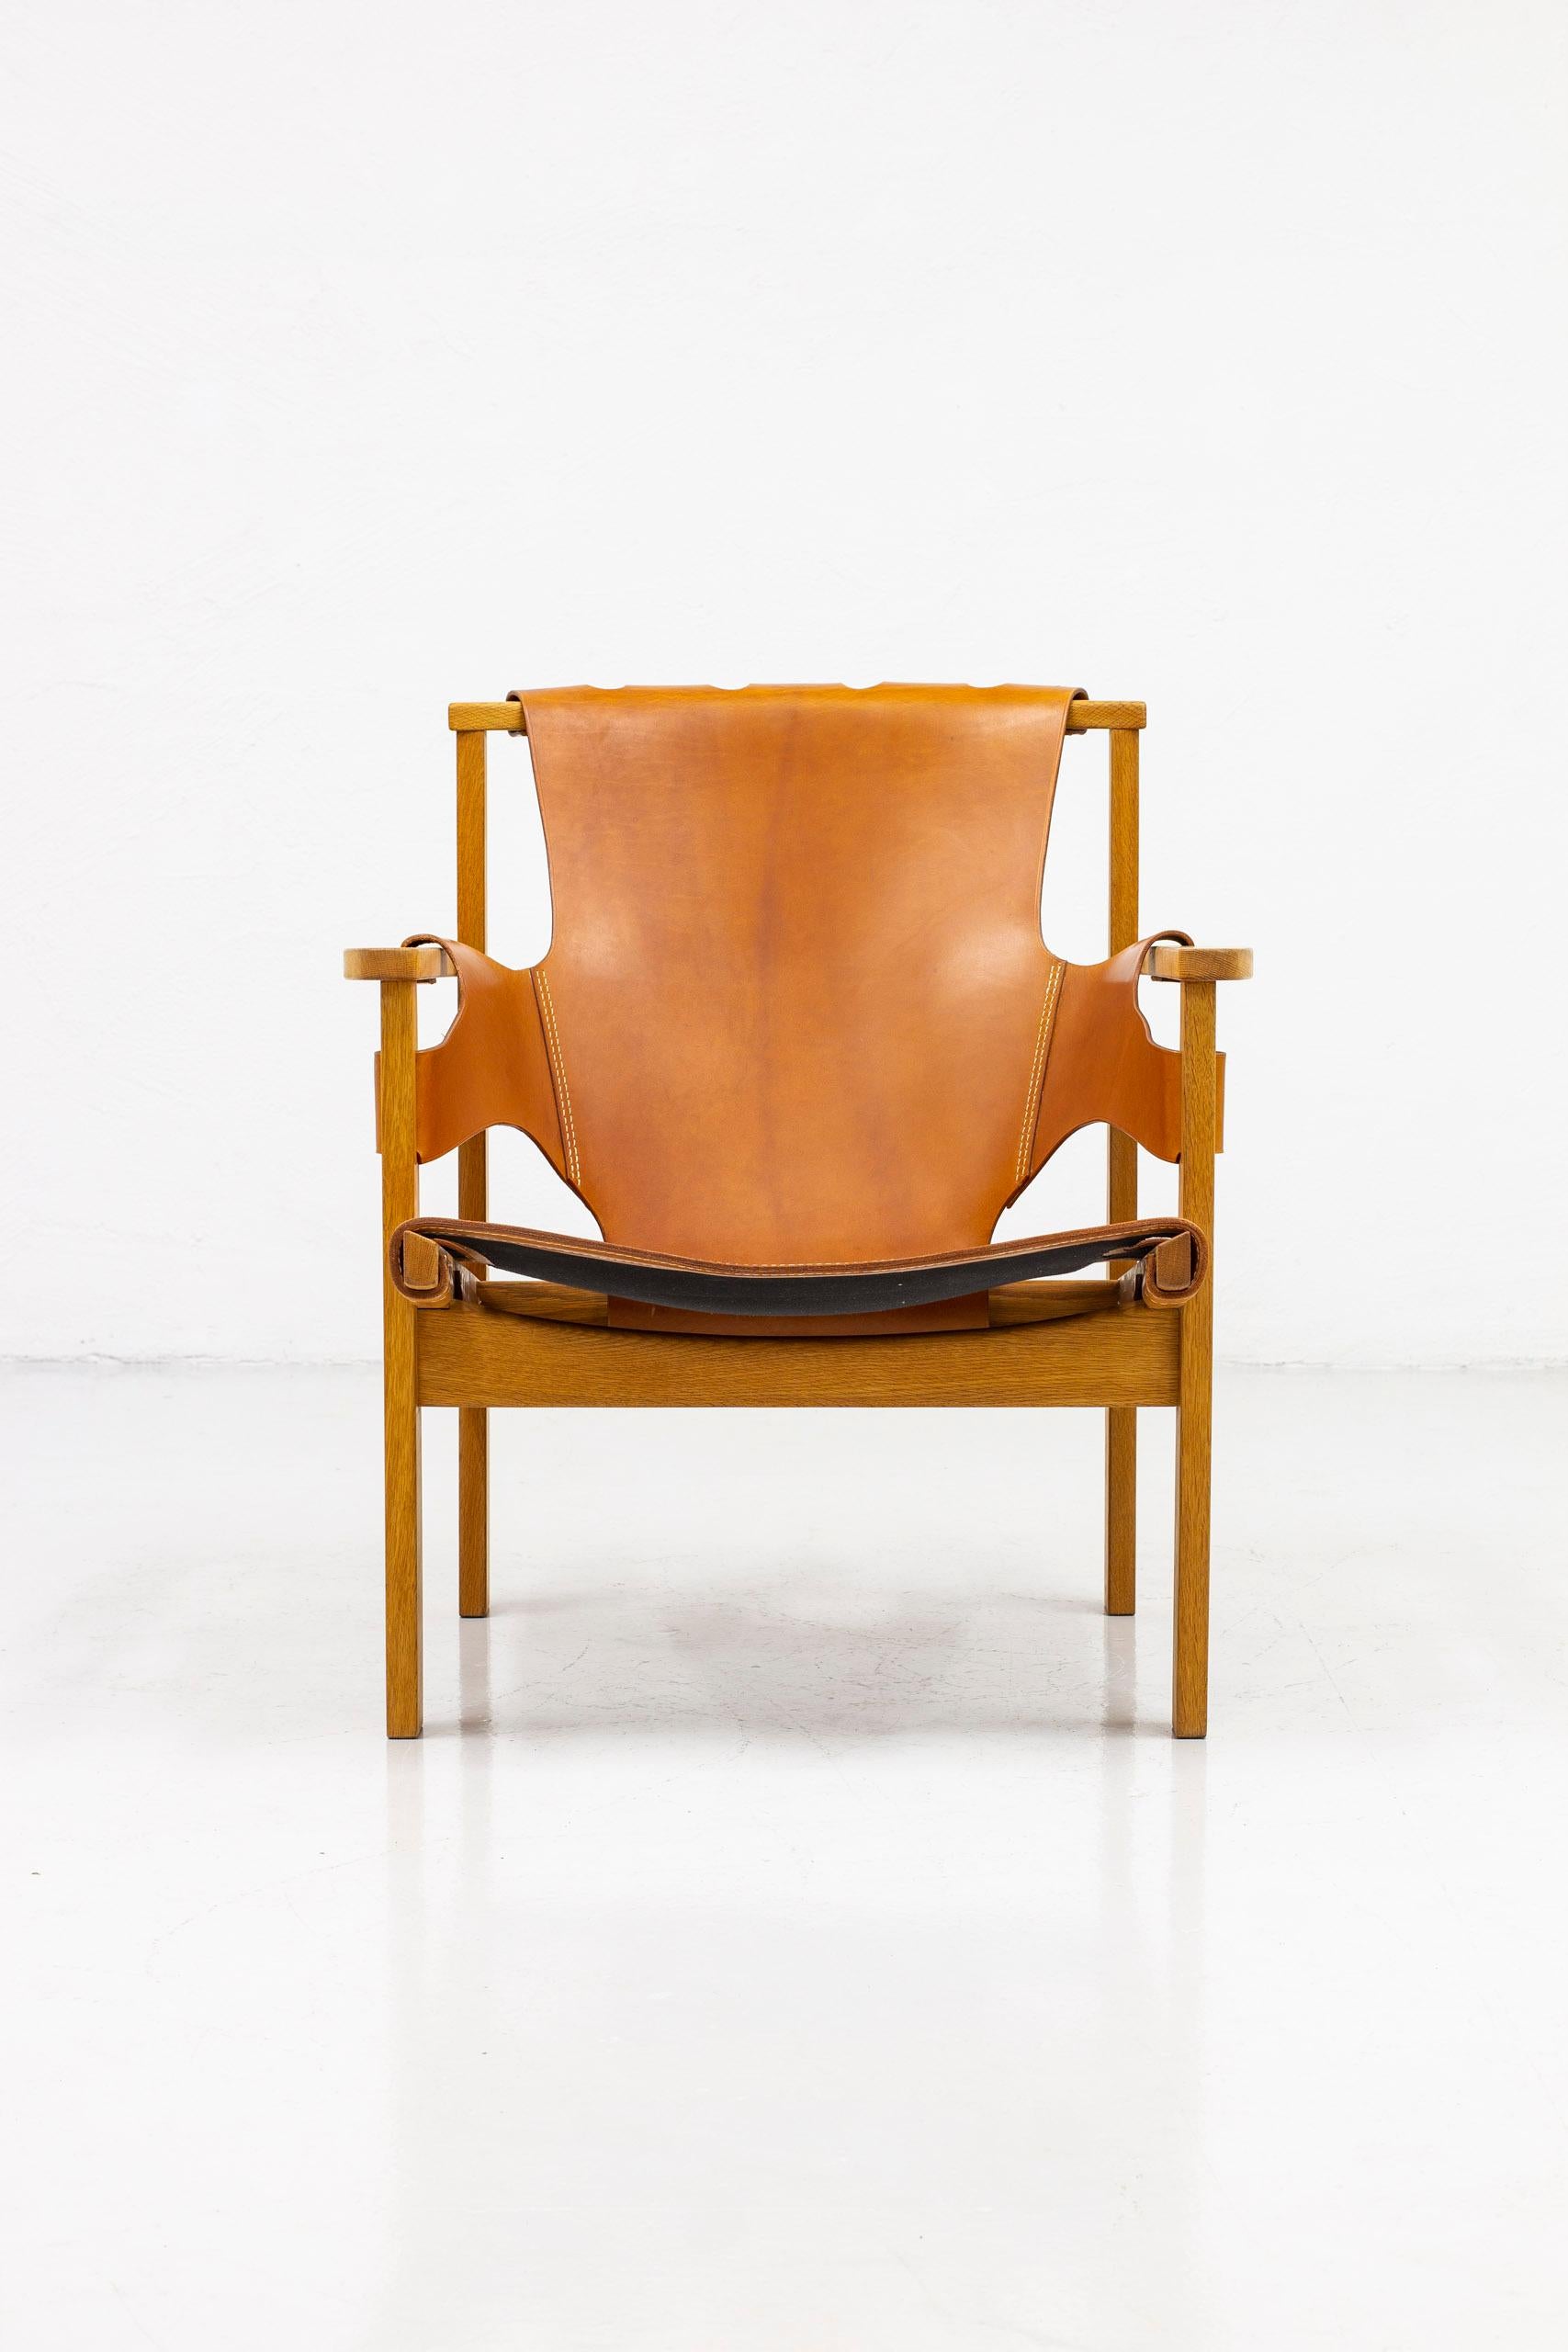 Lounge Chairs in Oak and Leather by Carl-Axel Acking, Nk, Nordiska Kompaniet 8